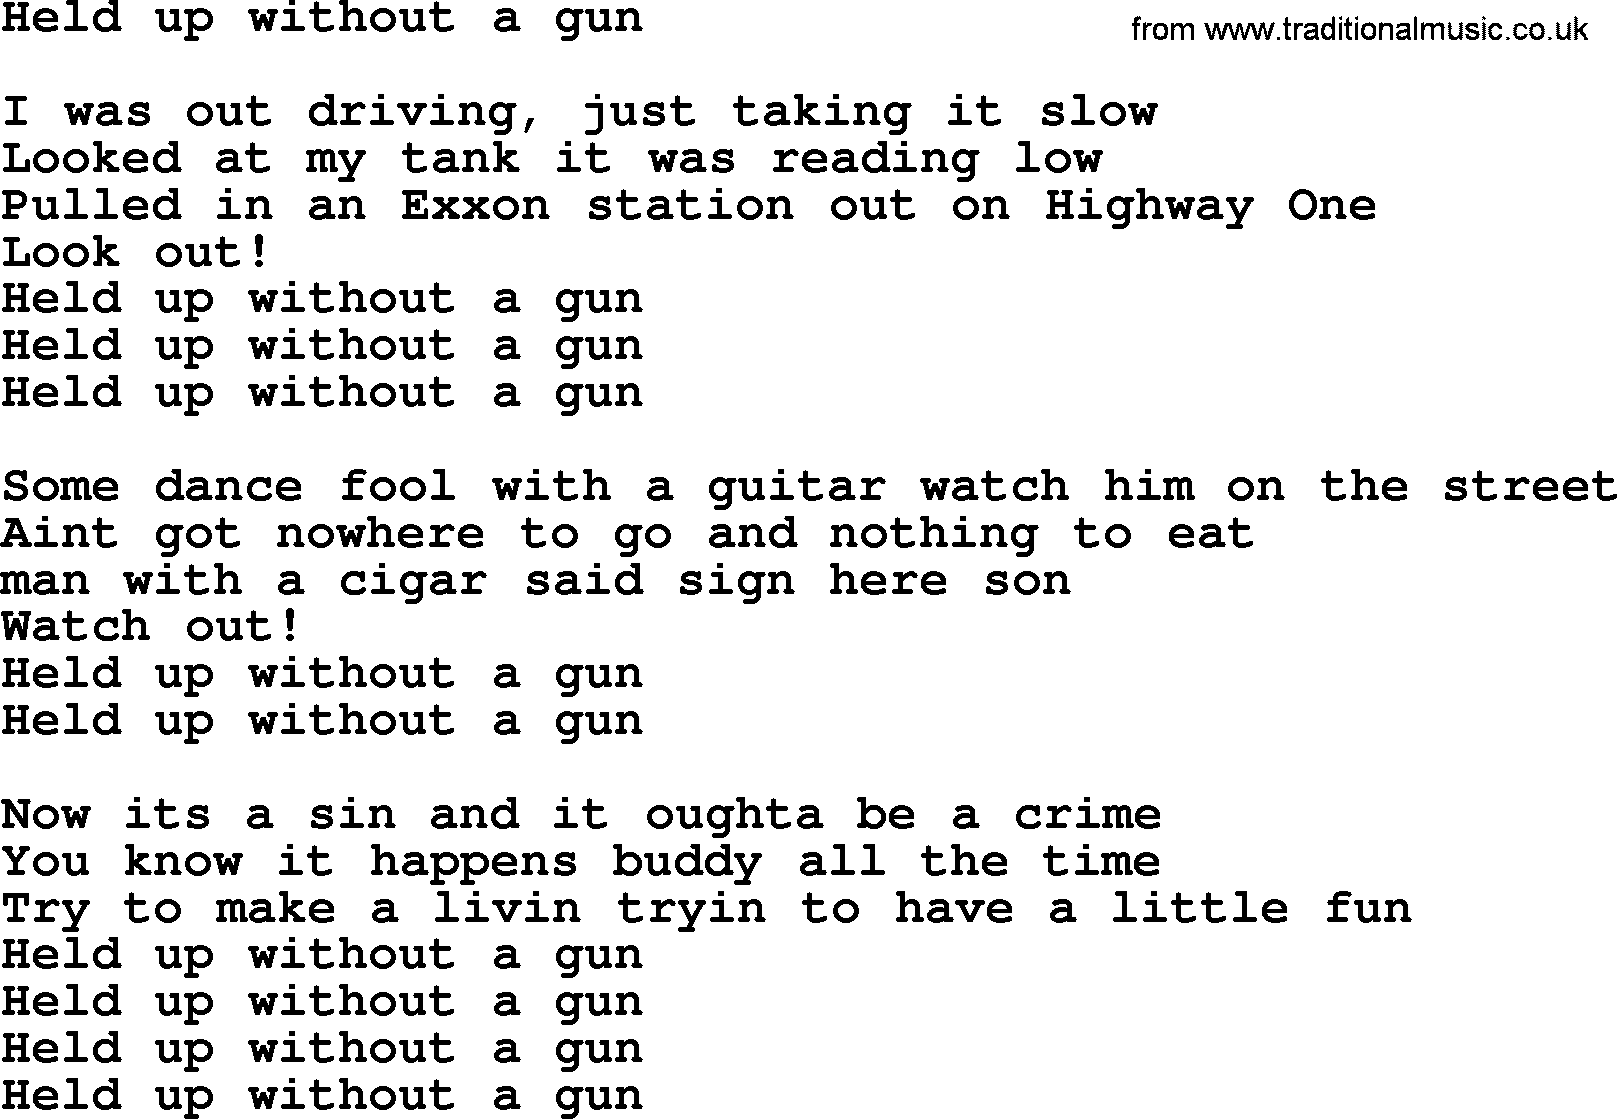 Bruce Springsteen song: Held Up Without A Gun lyrics